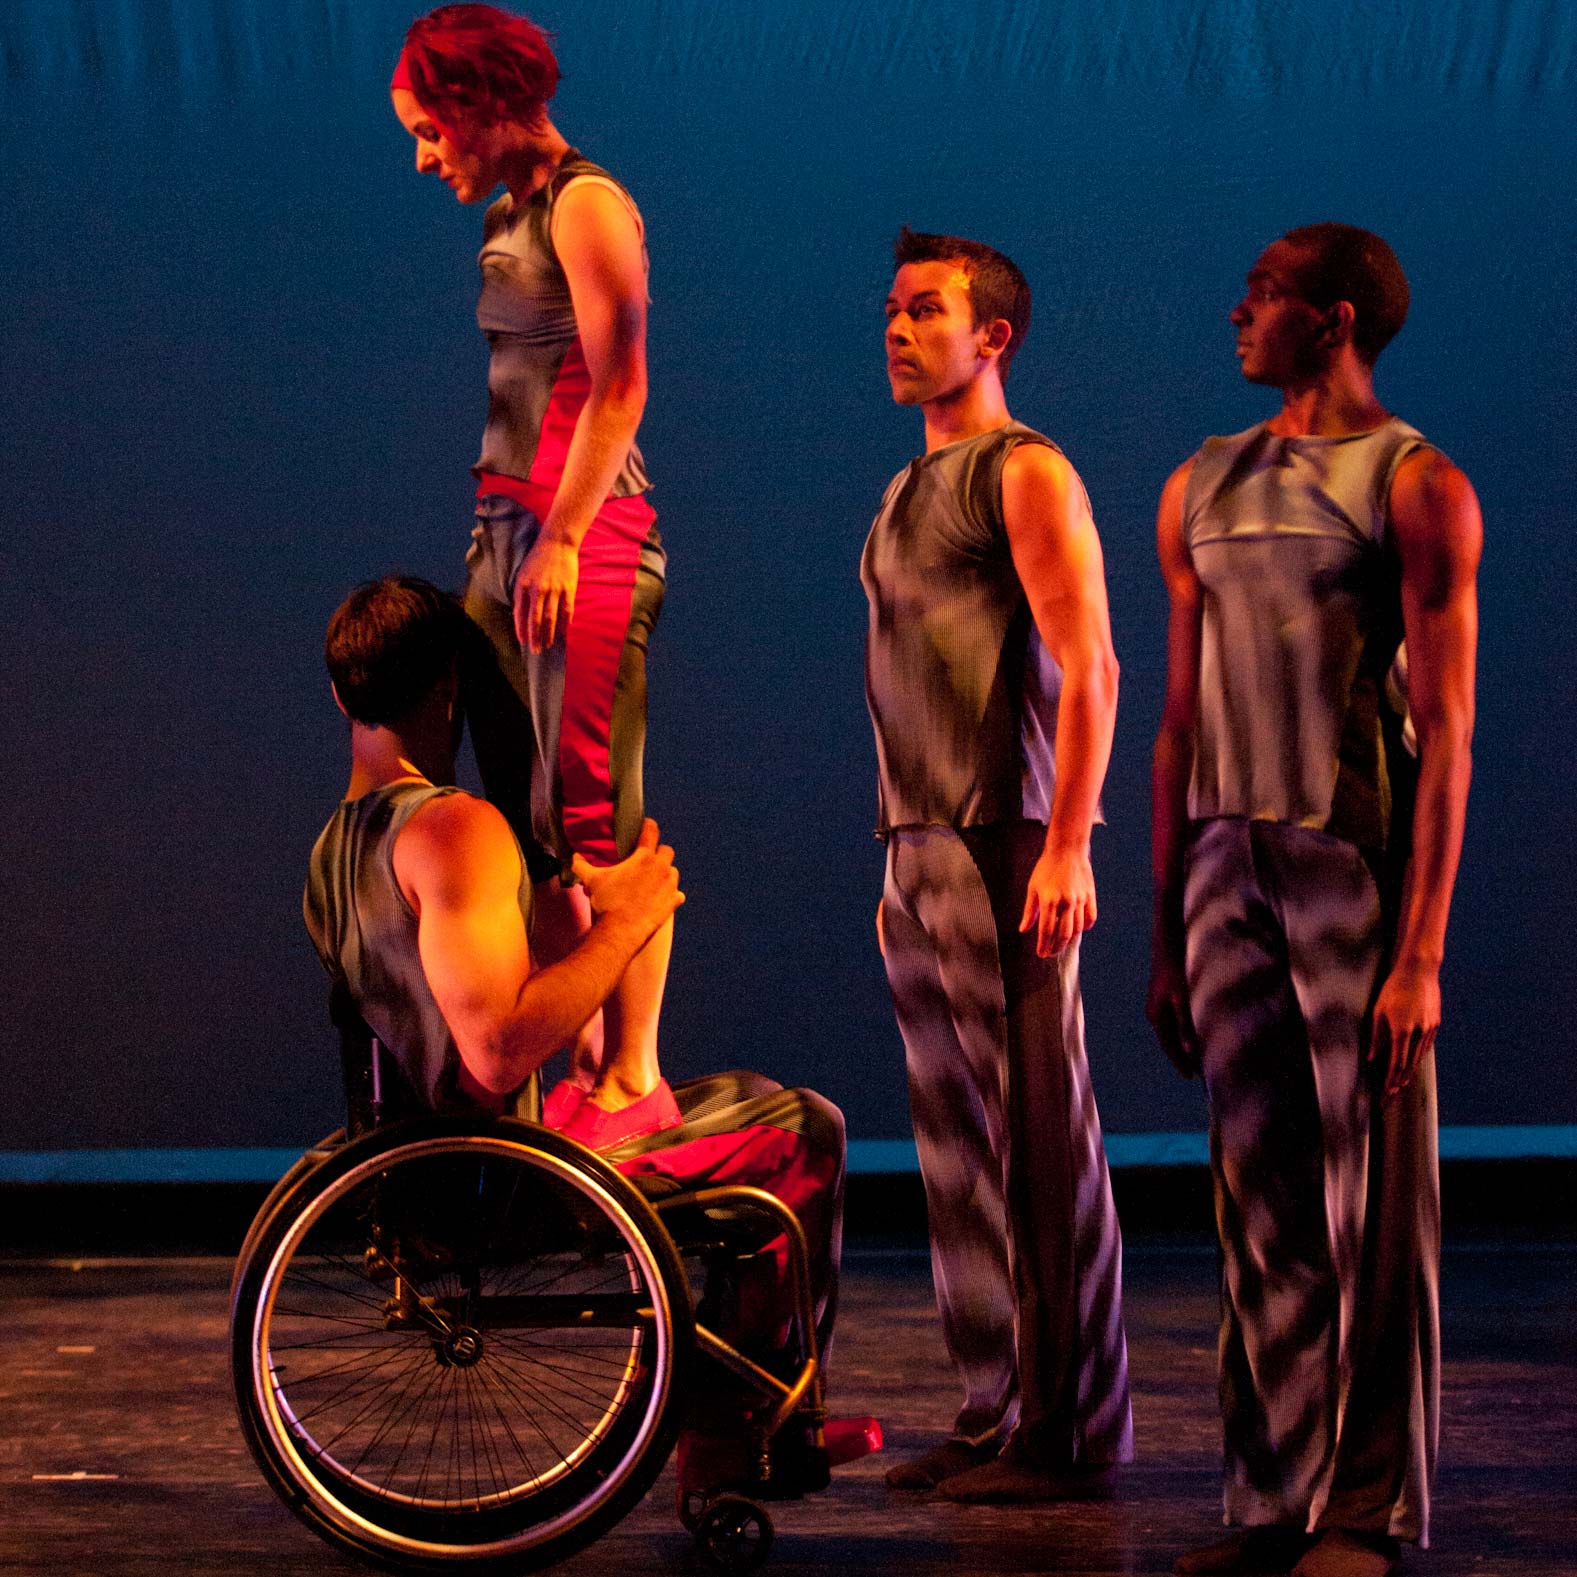 One dancer in wheelchair supporting another dancer while two others stand to right.